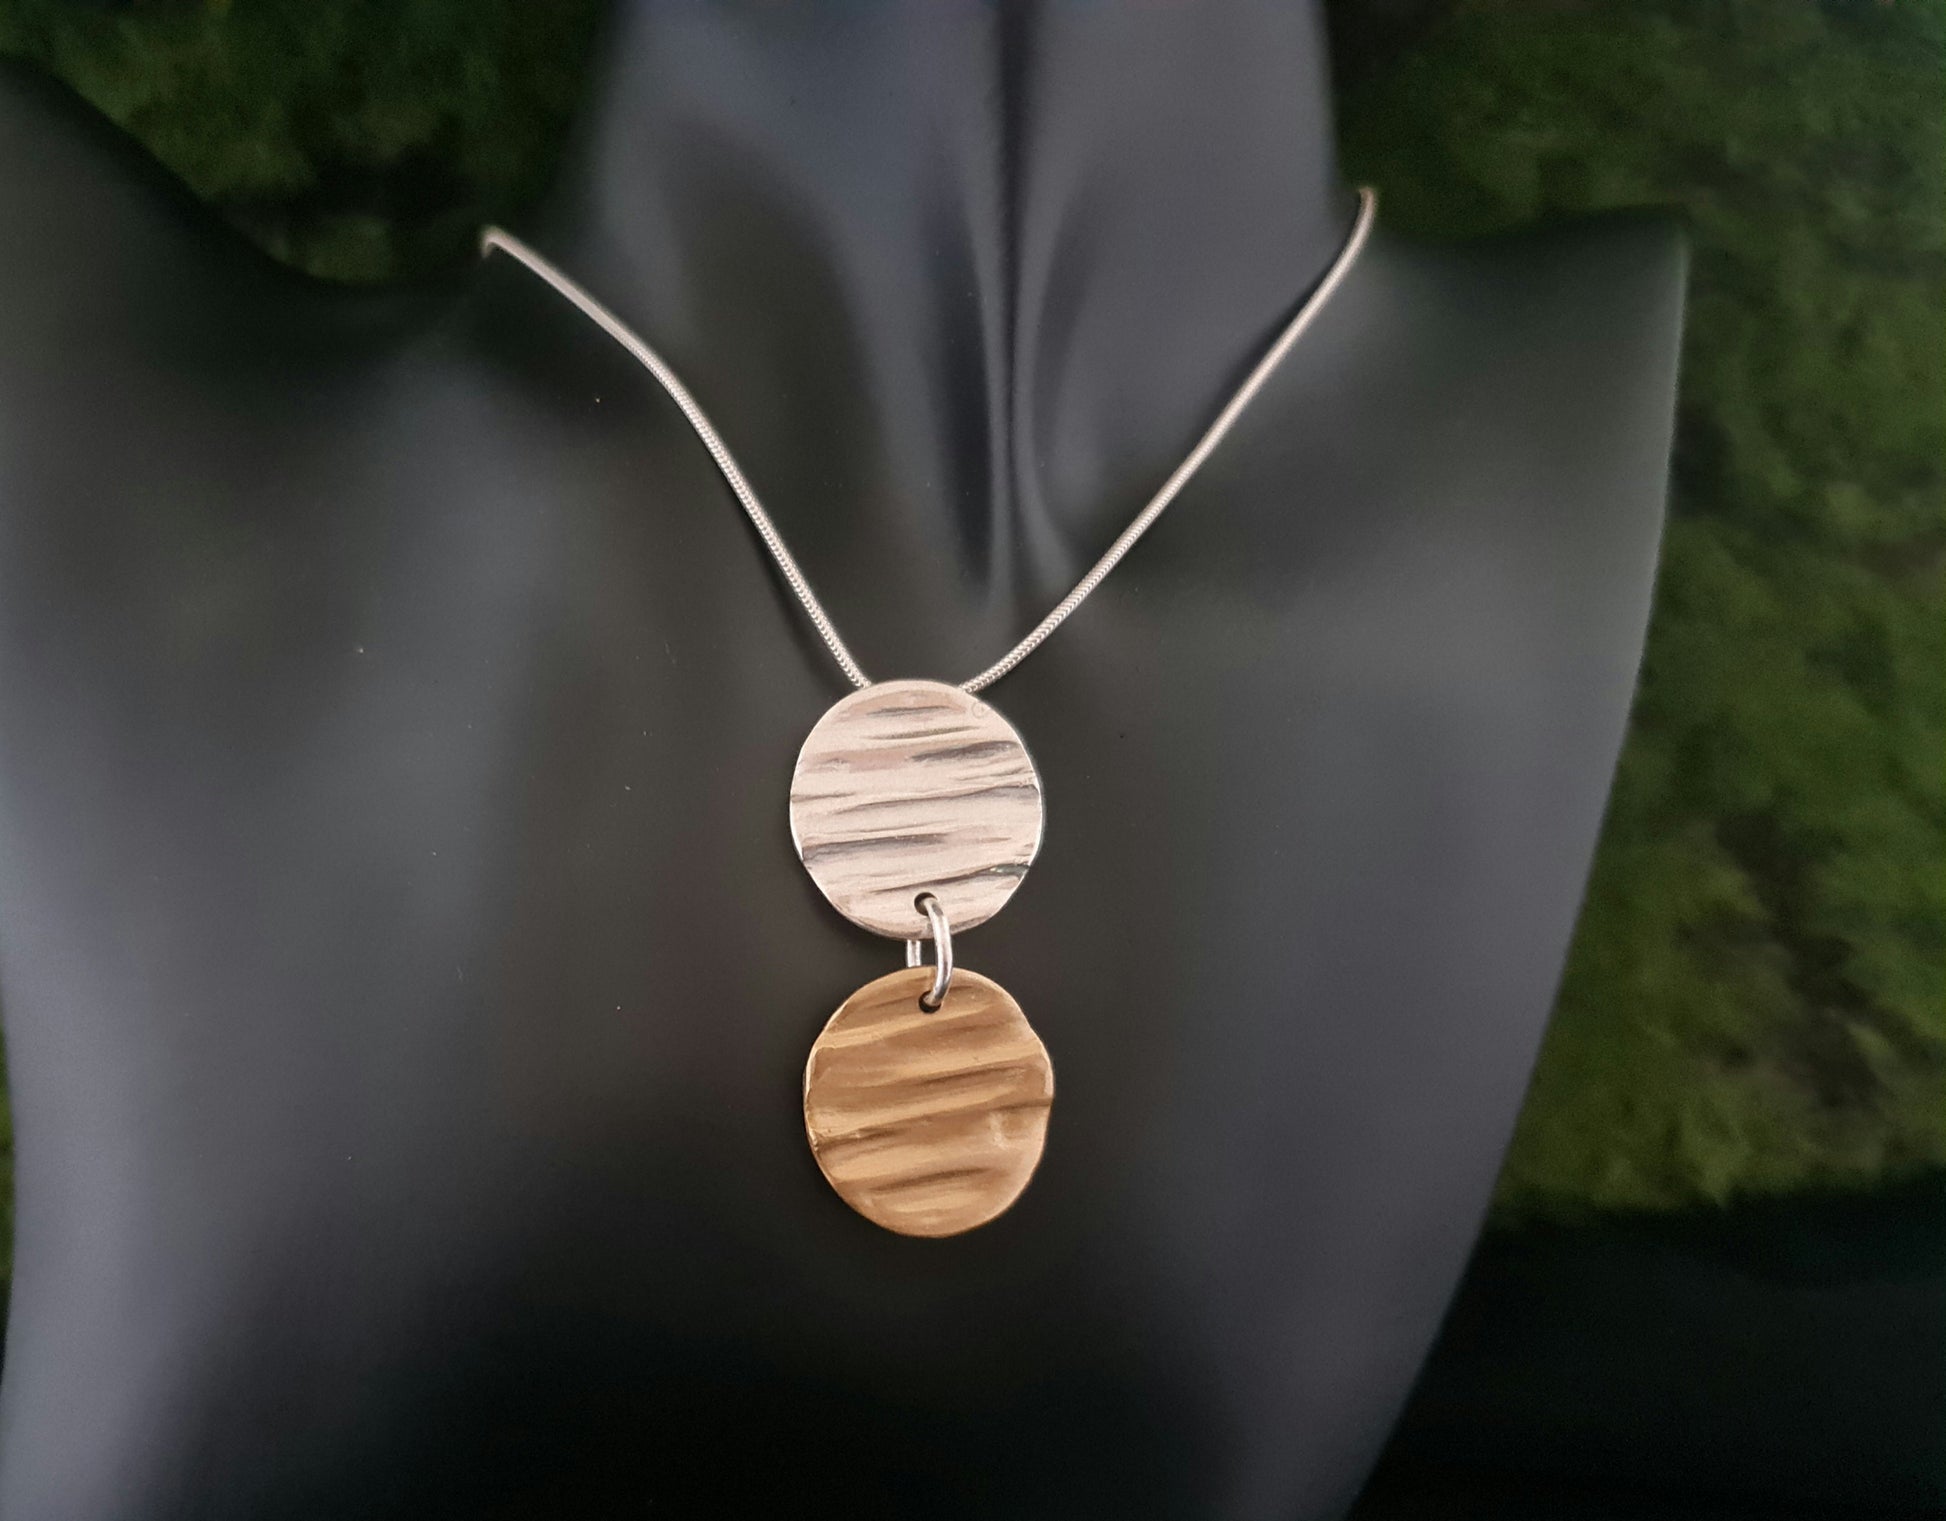 Amsbury wood duo pendant silver and bronze necklace shown on a black faux neck